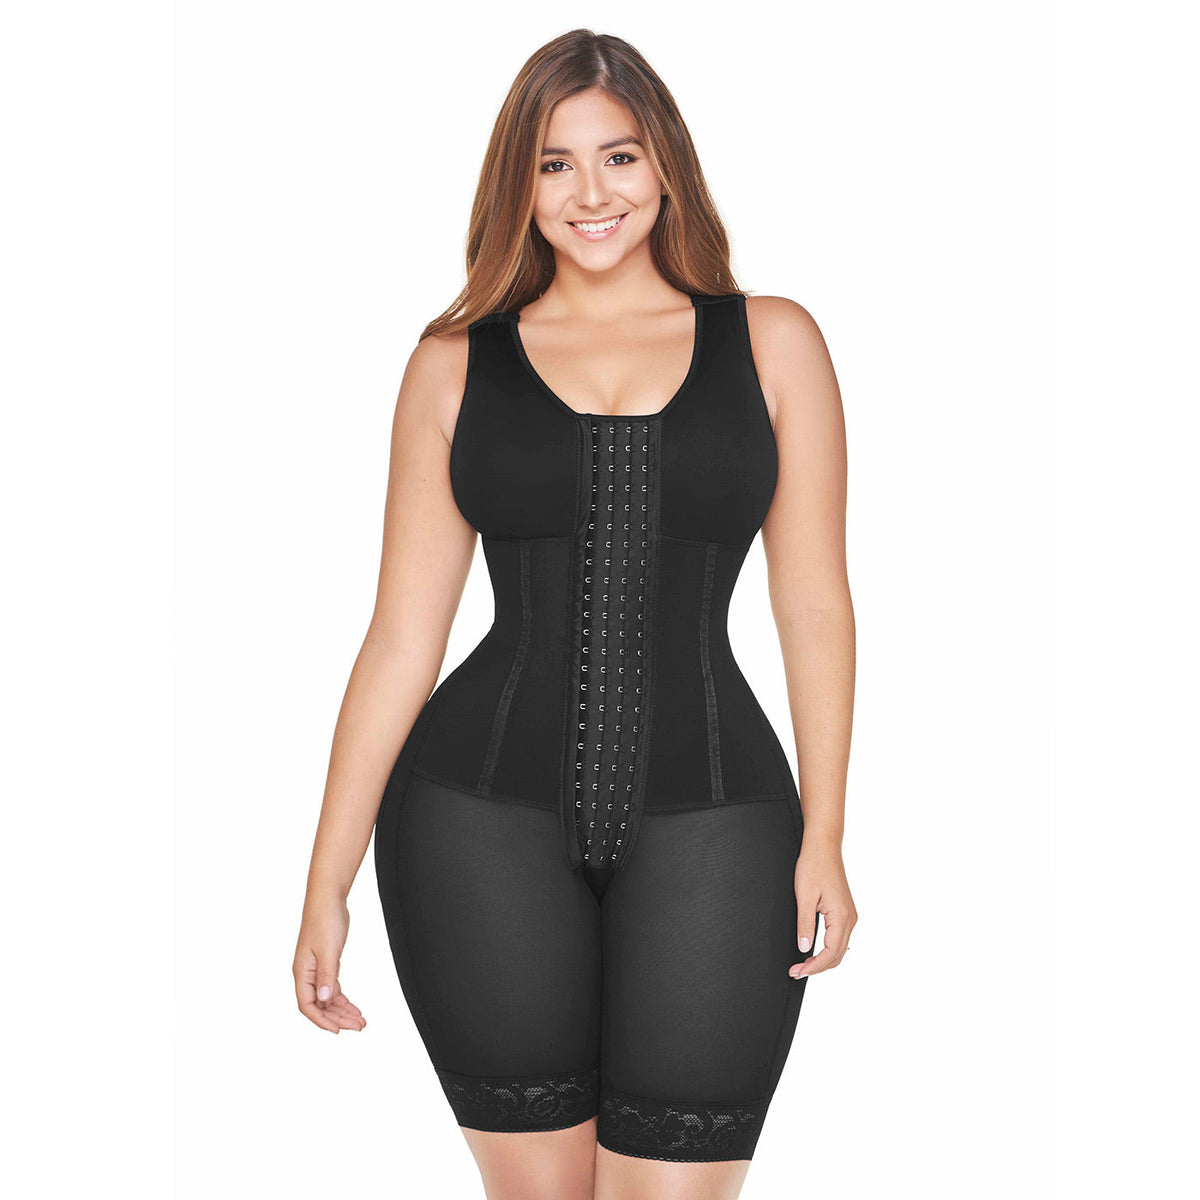 Fajas MariaE RA001 Mid Thigh Daily Use Bodysuit Butt Lifter Shaper  Powernet